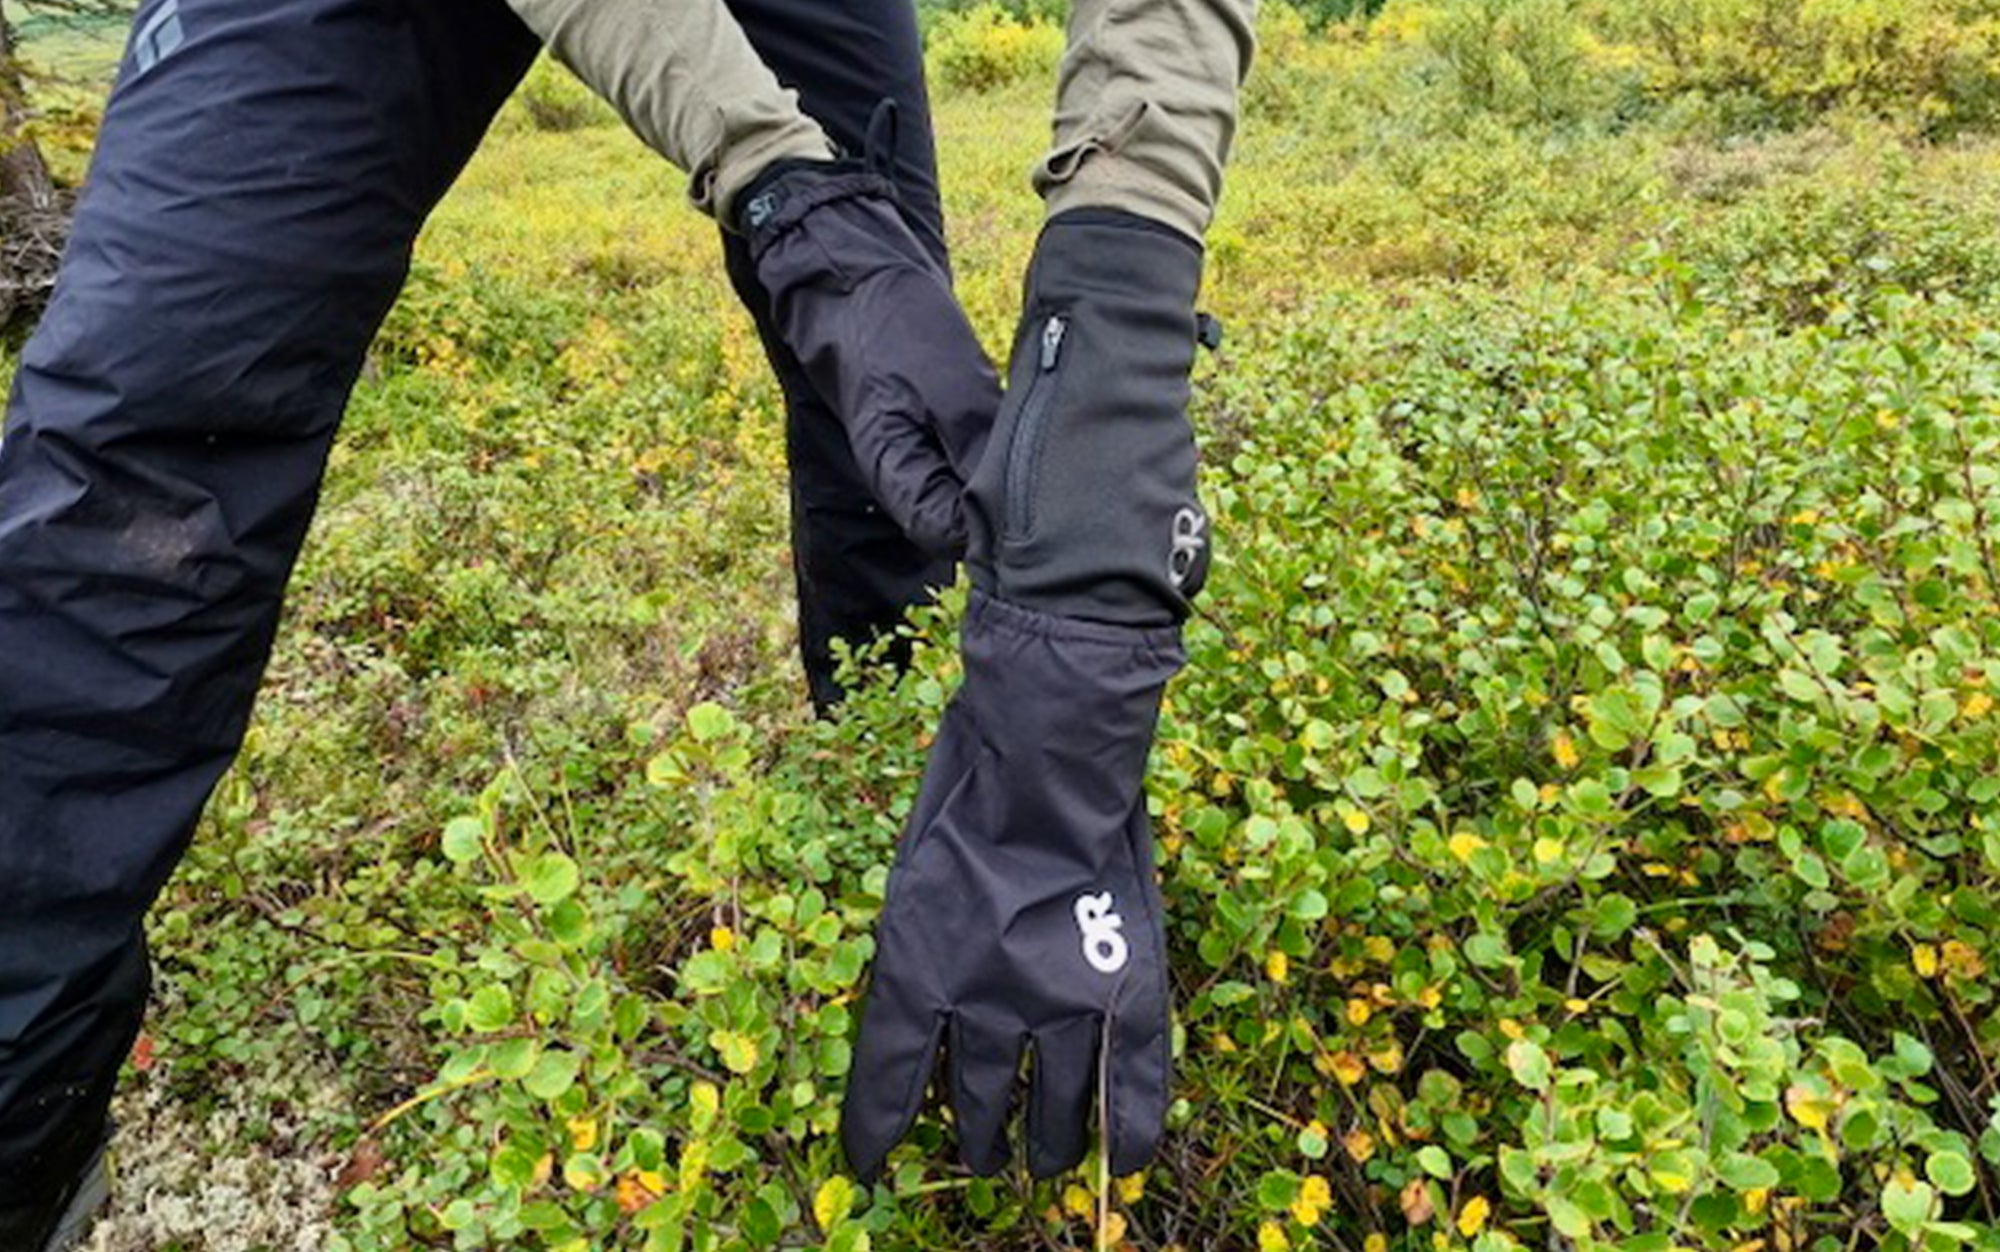 We tested the Outdoor Research hiking gloves.